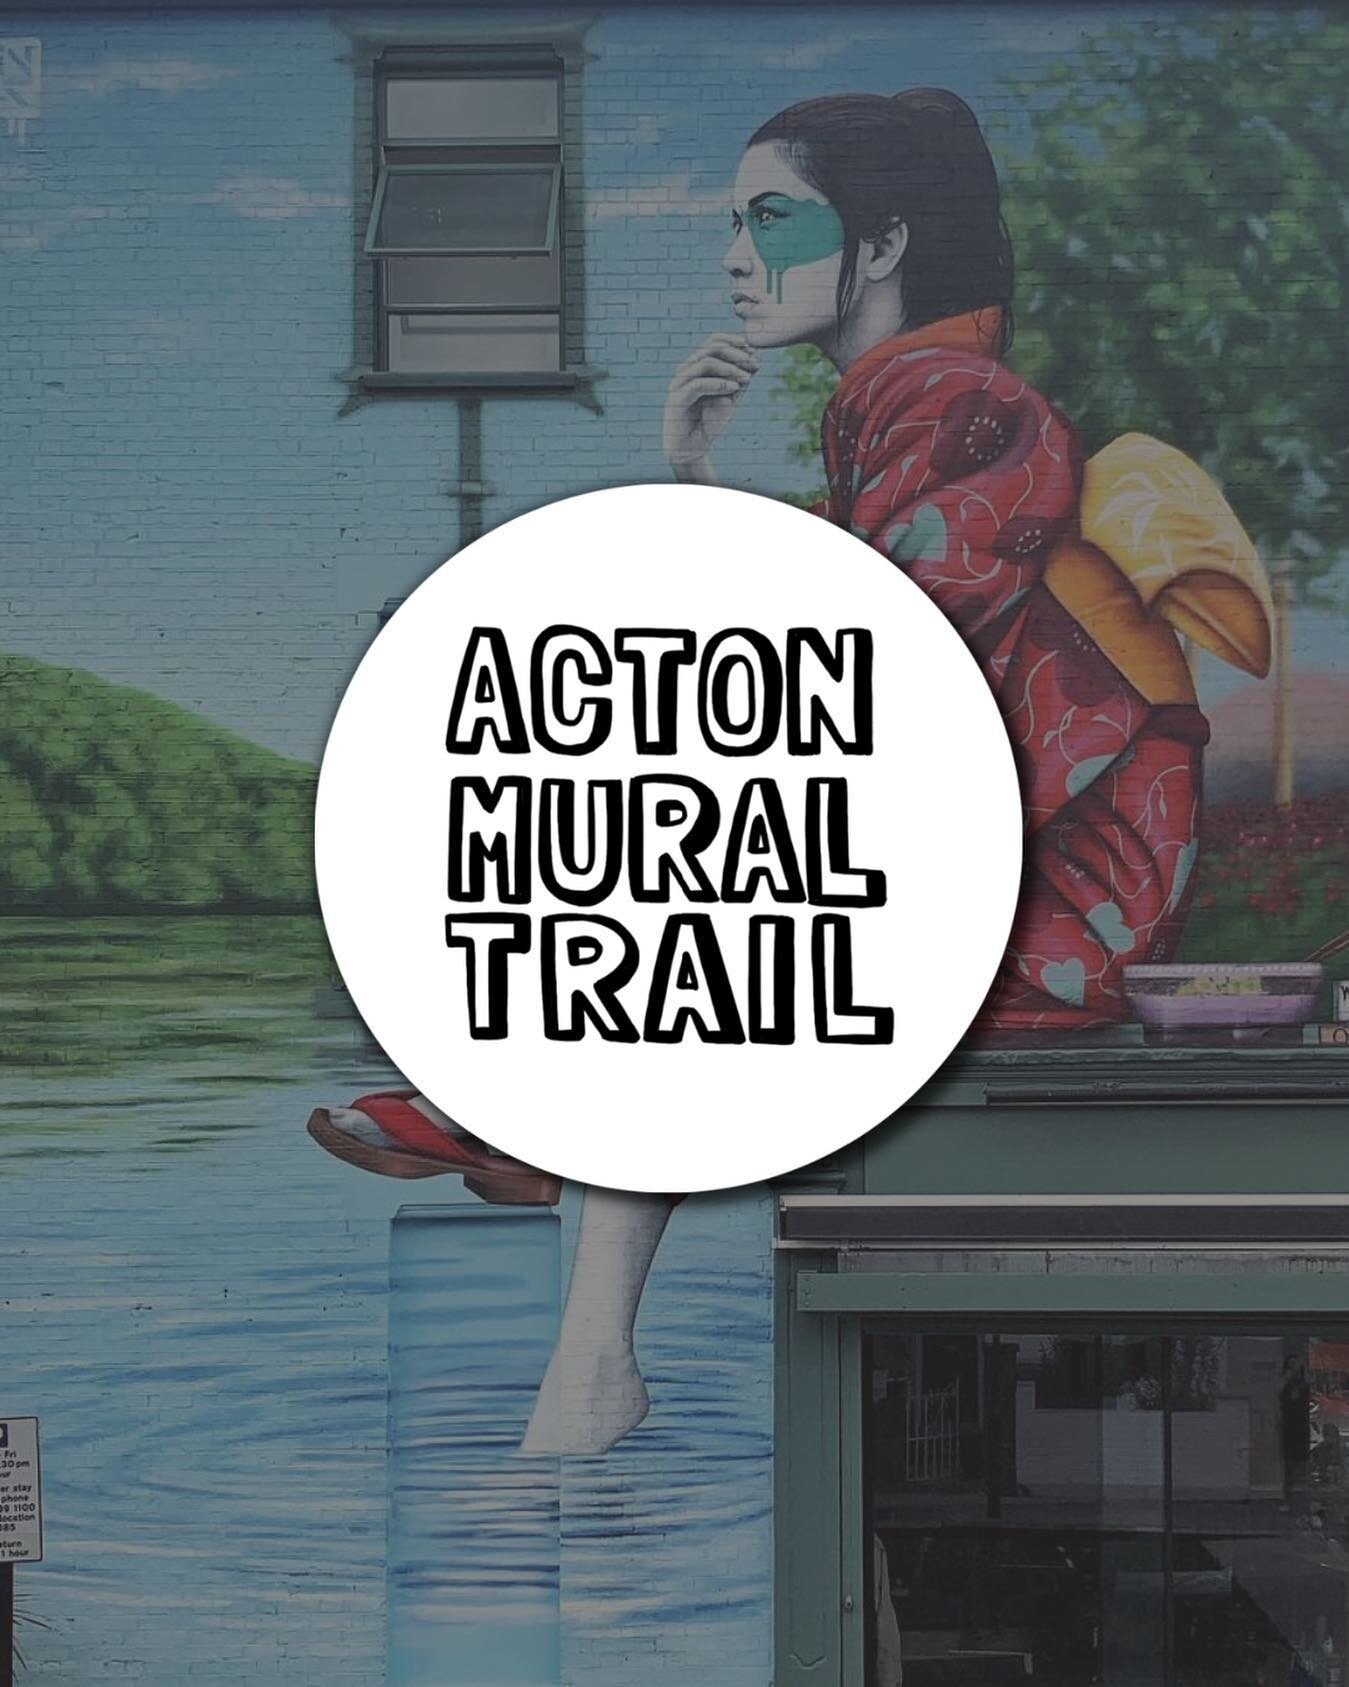 Launching this Sept at @openhousefestival &lsquo;Acton Mural Trail&rsquo; see more at actonnotebook.com/actonmuraltrail #actonmuraltrail